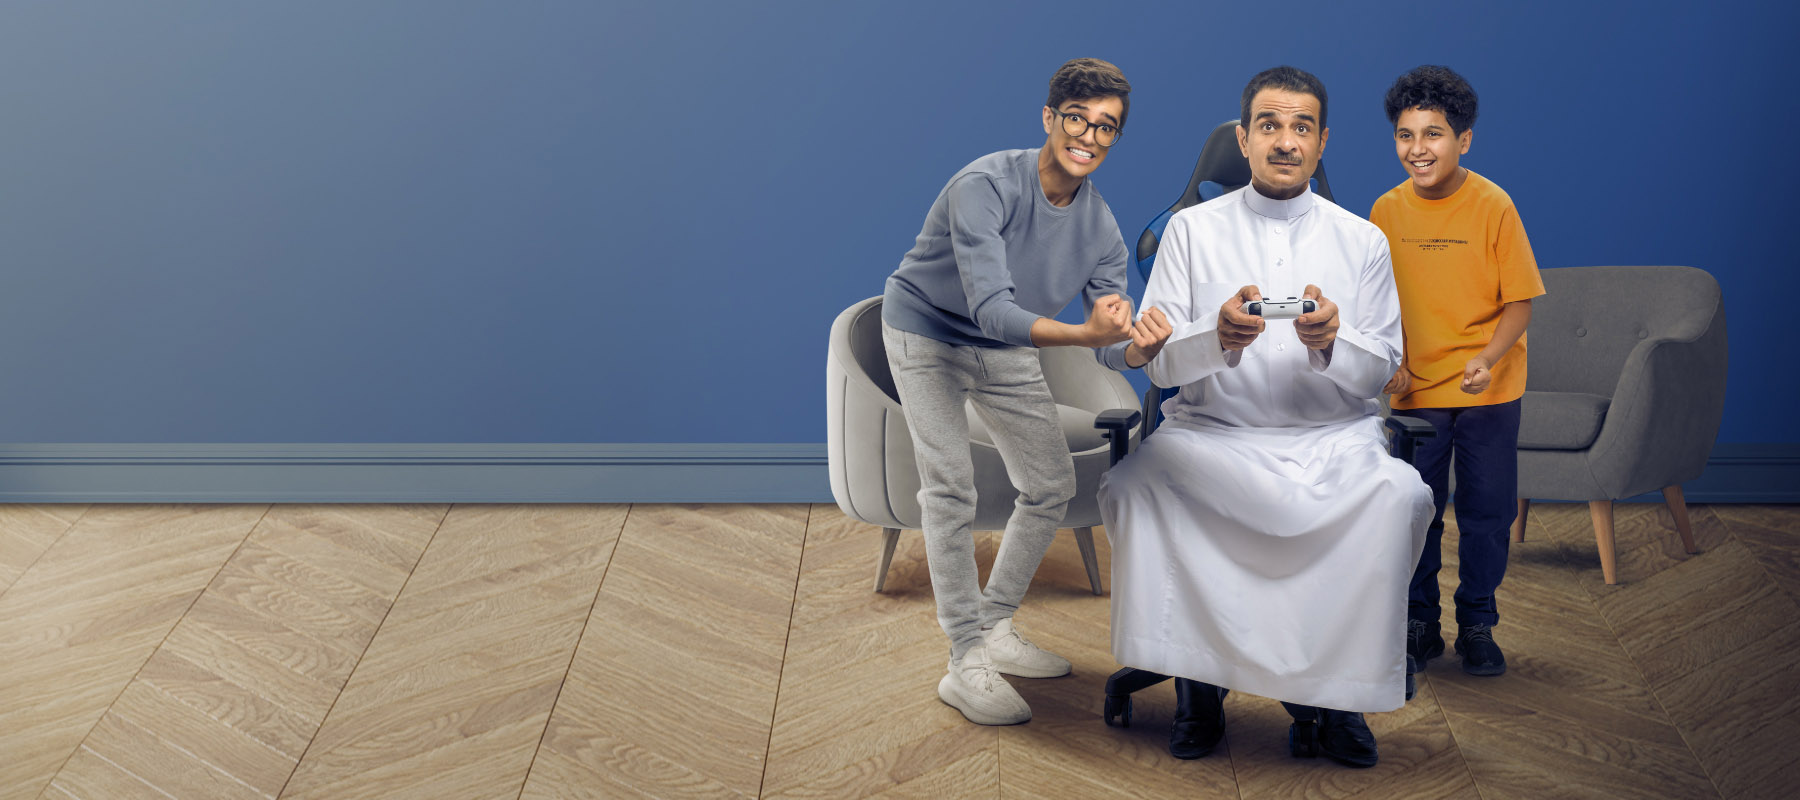 Mobily | Plans and Offers for Mobile & Internet